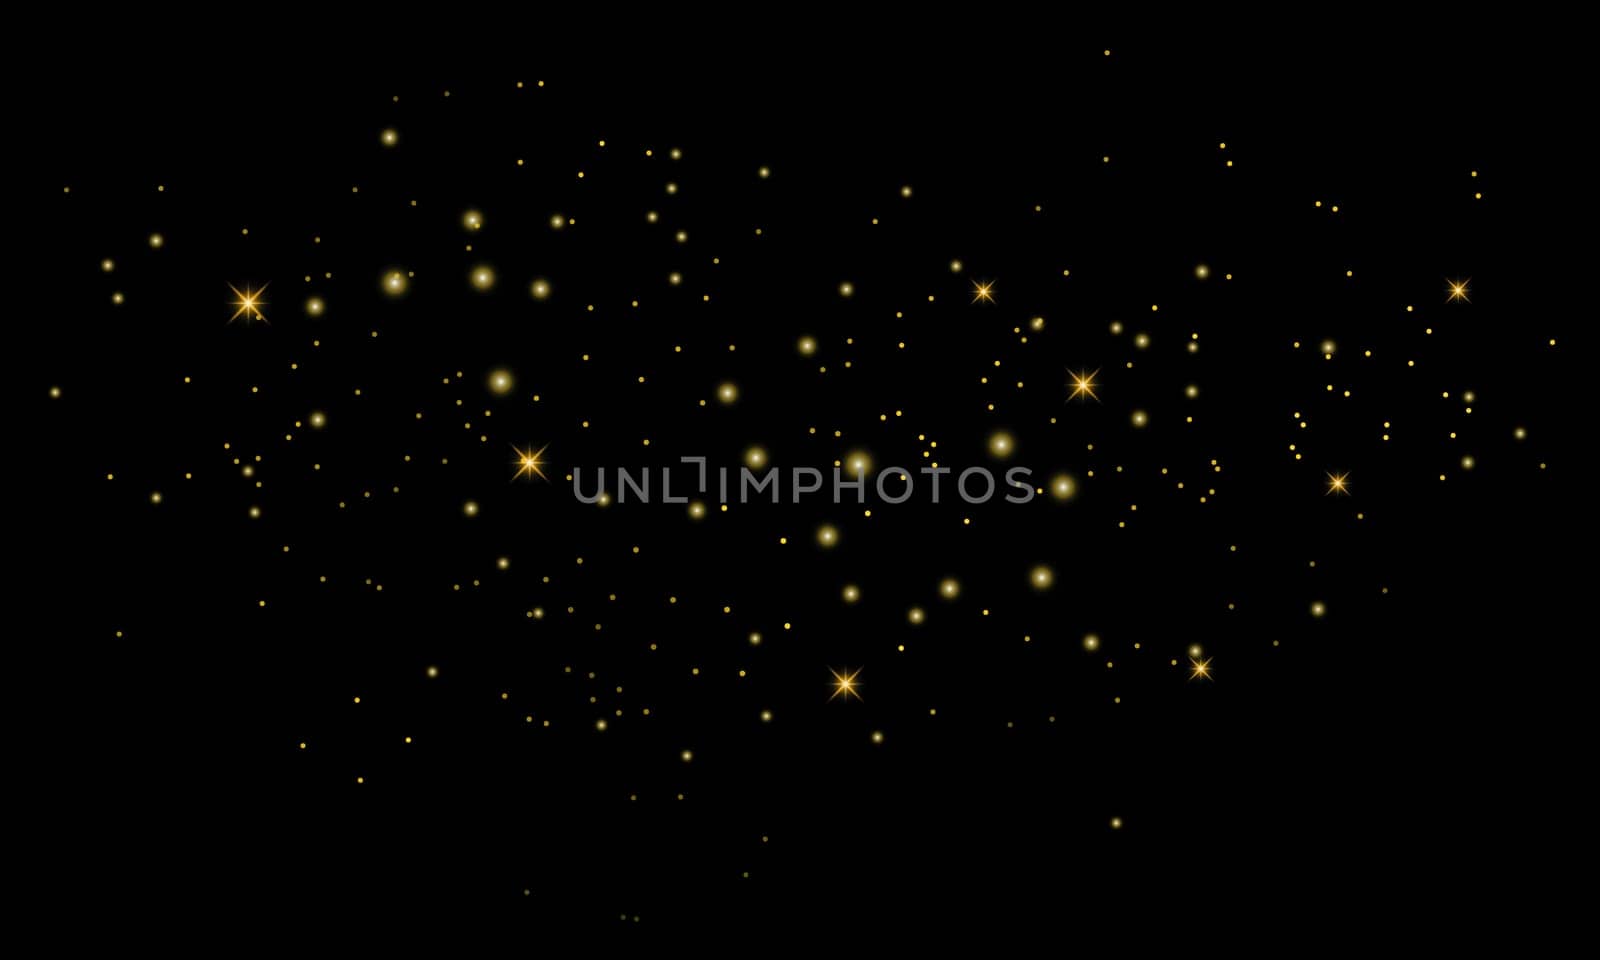 Glitter gold particles background effect for luxury greeting card. Christmas glowing light bokeh background texture.